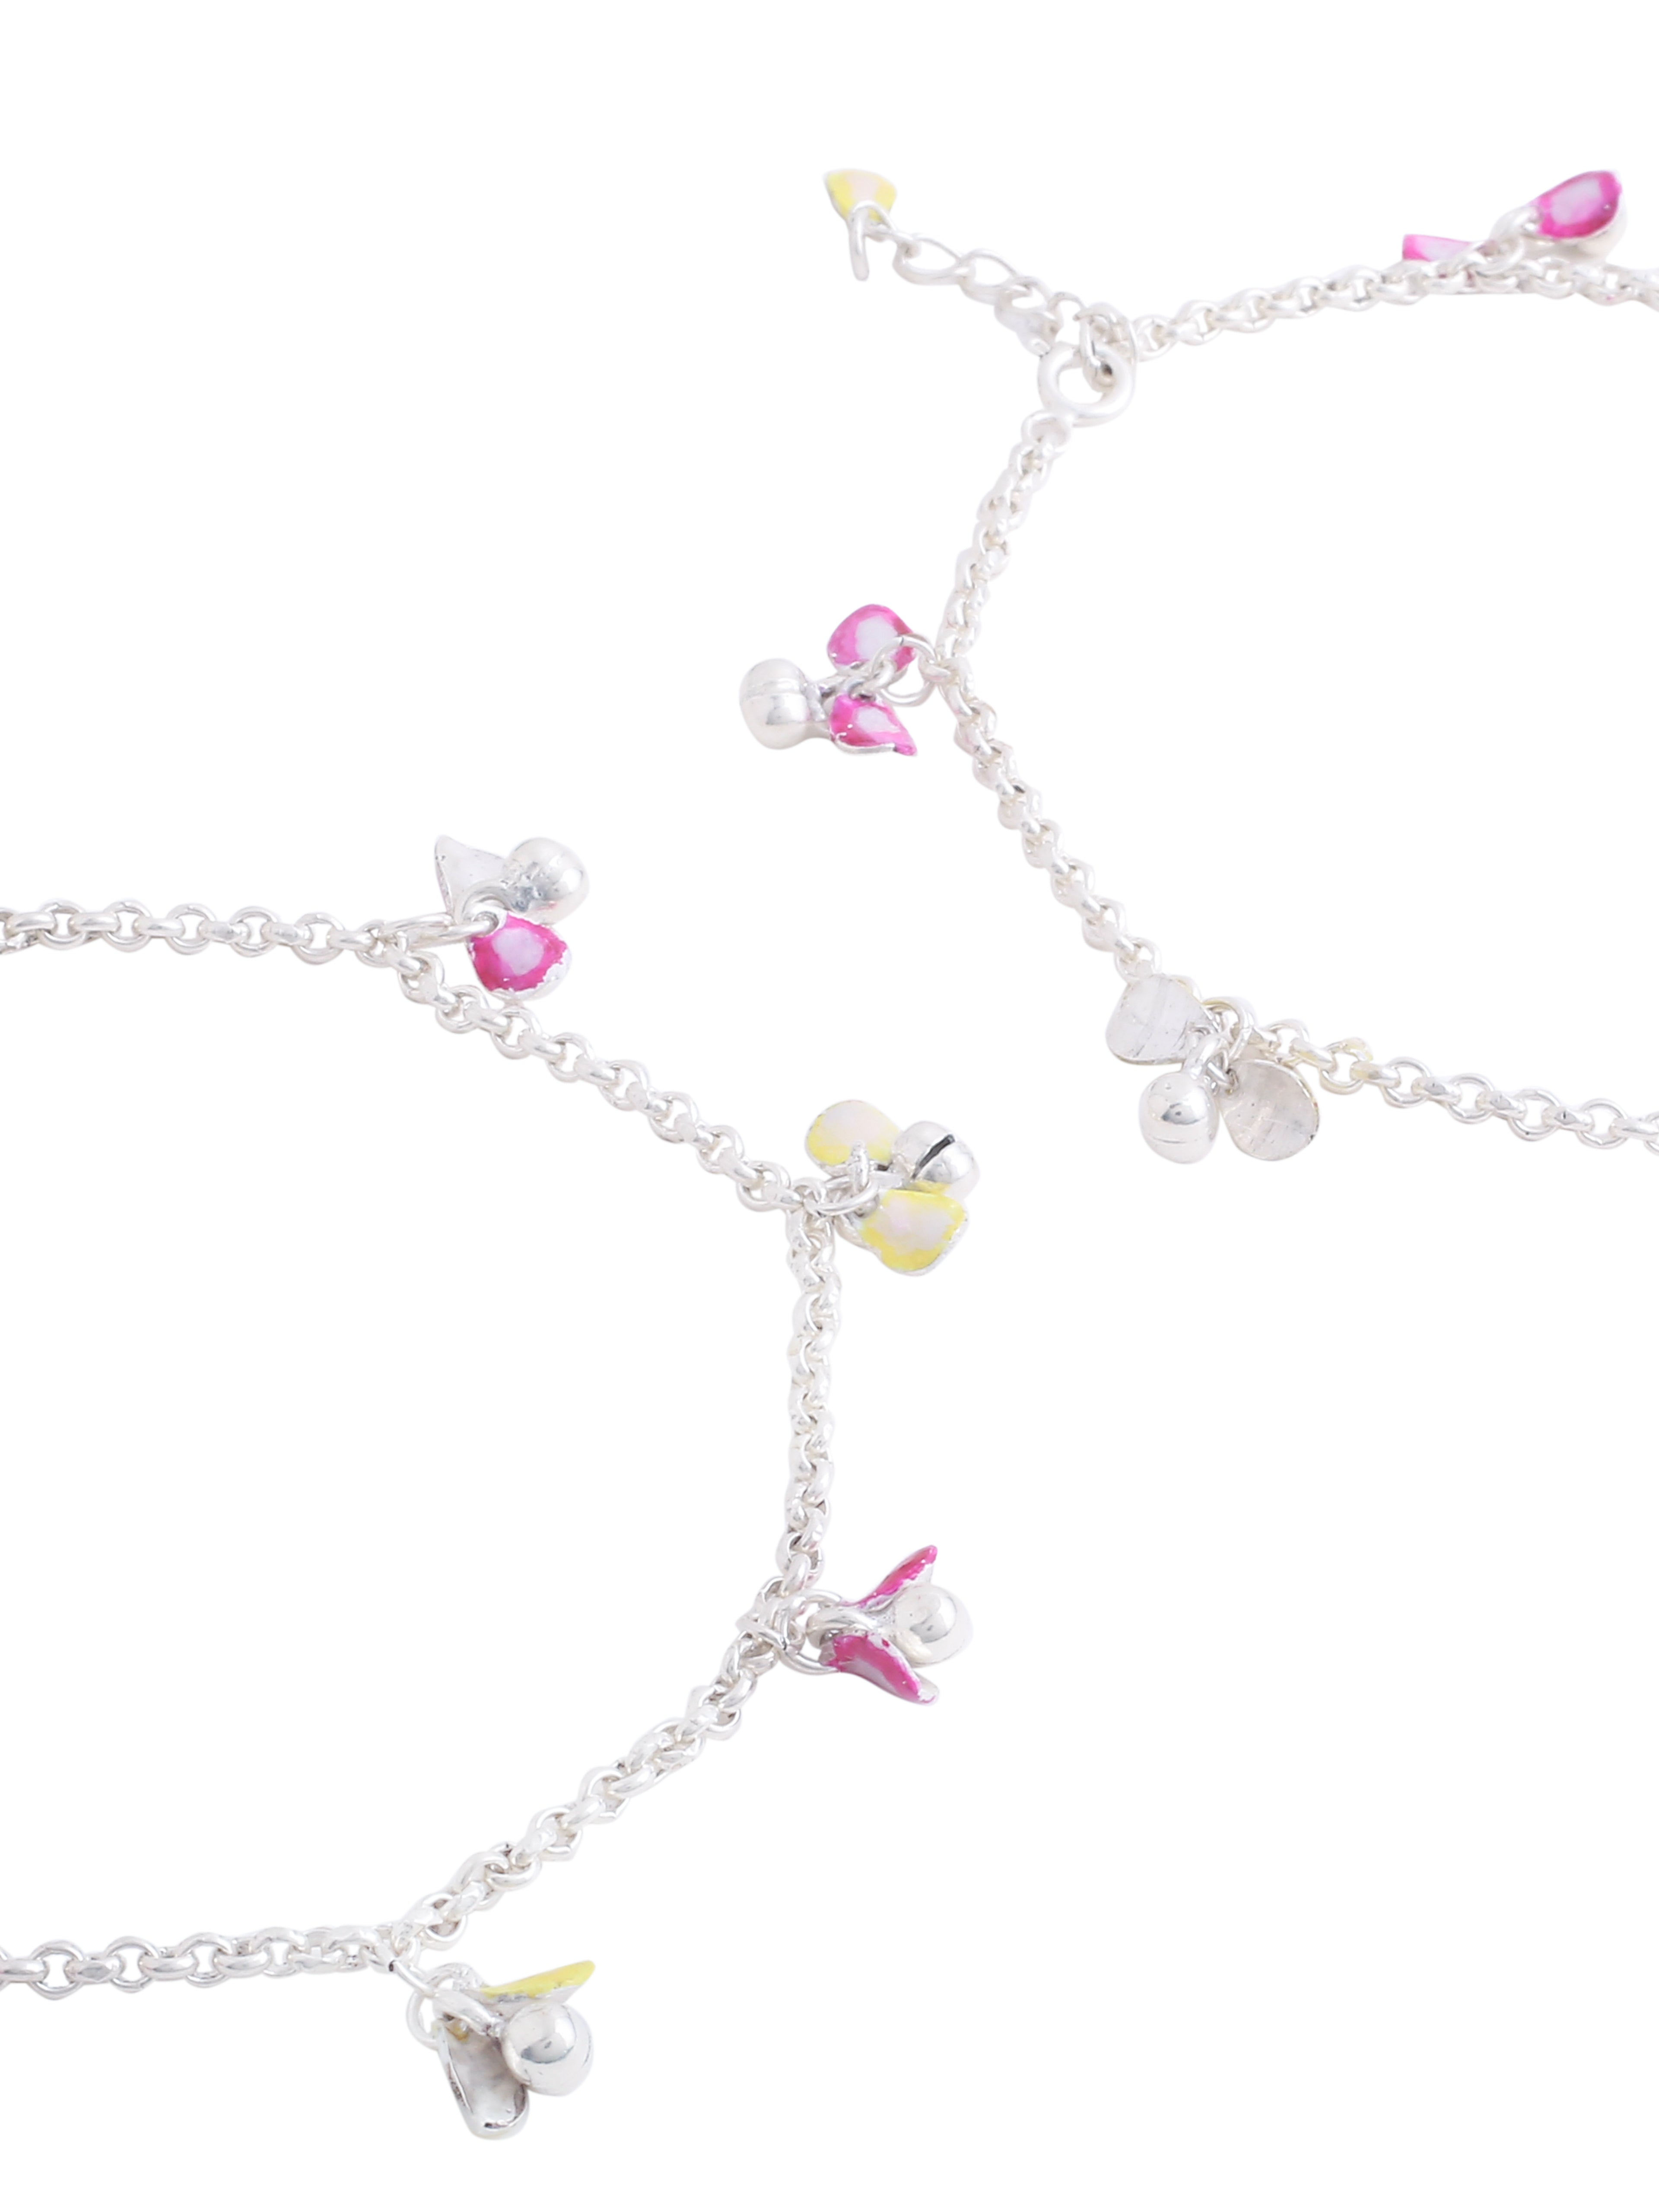 Chic Sterling Silver Anklet with Dual Enamel Petal Charms